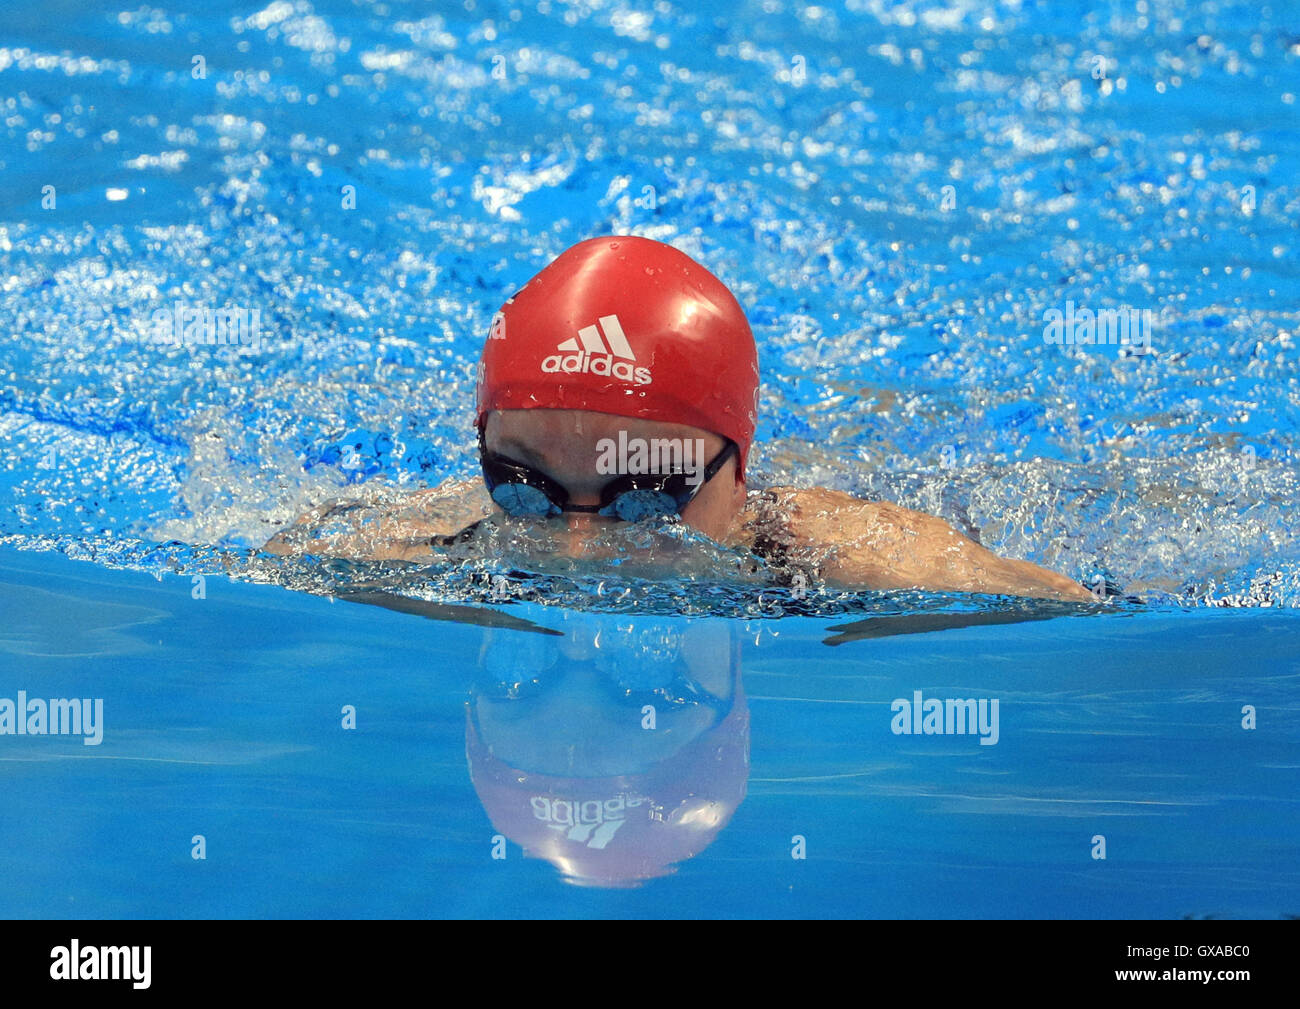 Great Britain's Ellie Simmonds competes in the Women's SB6 100 metre Breaststroke Final during the eighth day of the 2016 Rio Paralympic Games in Rio de Janeiro, Brazil. Stock Photo